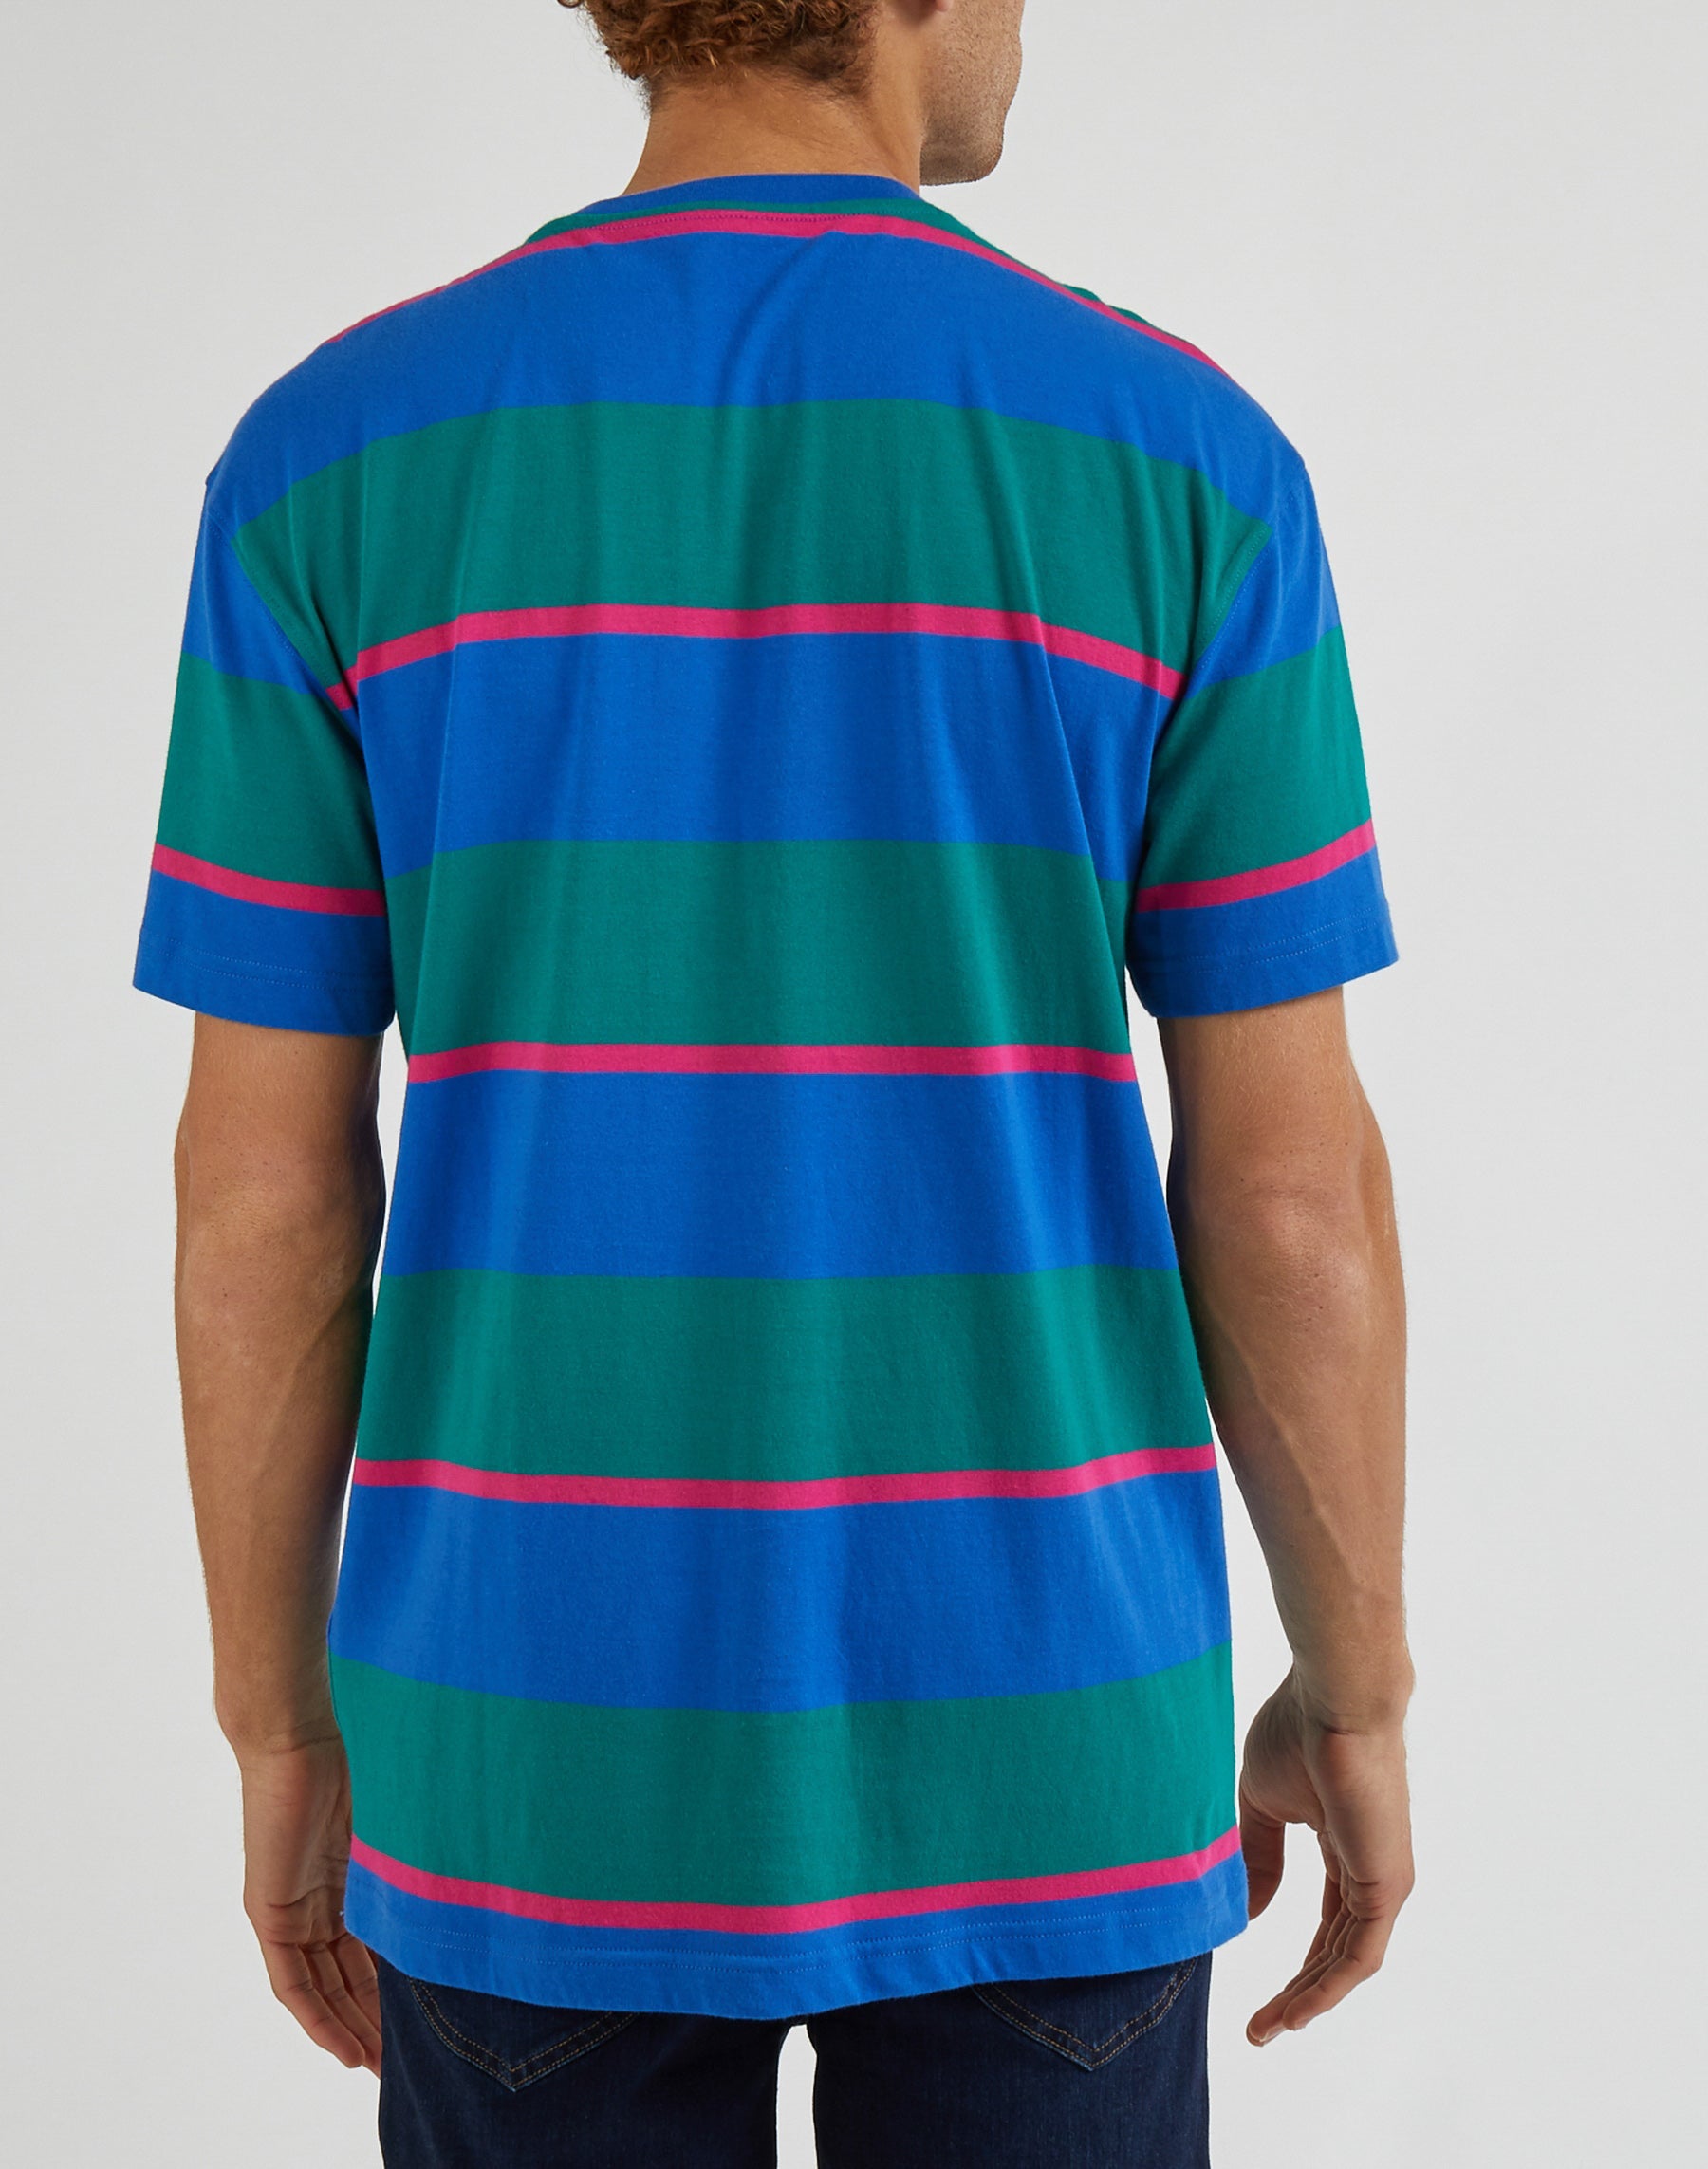 80S Relaxed Stripe Tee in Ferris T-Shirts Lee   